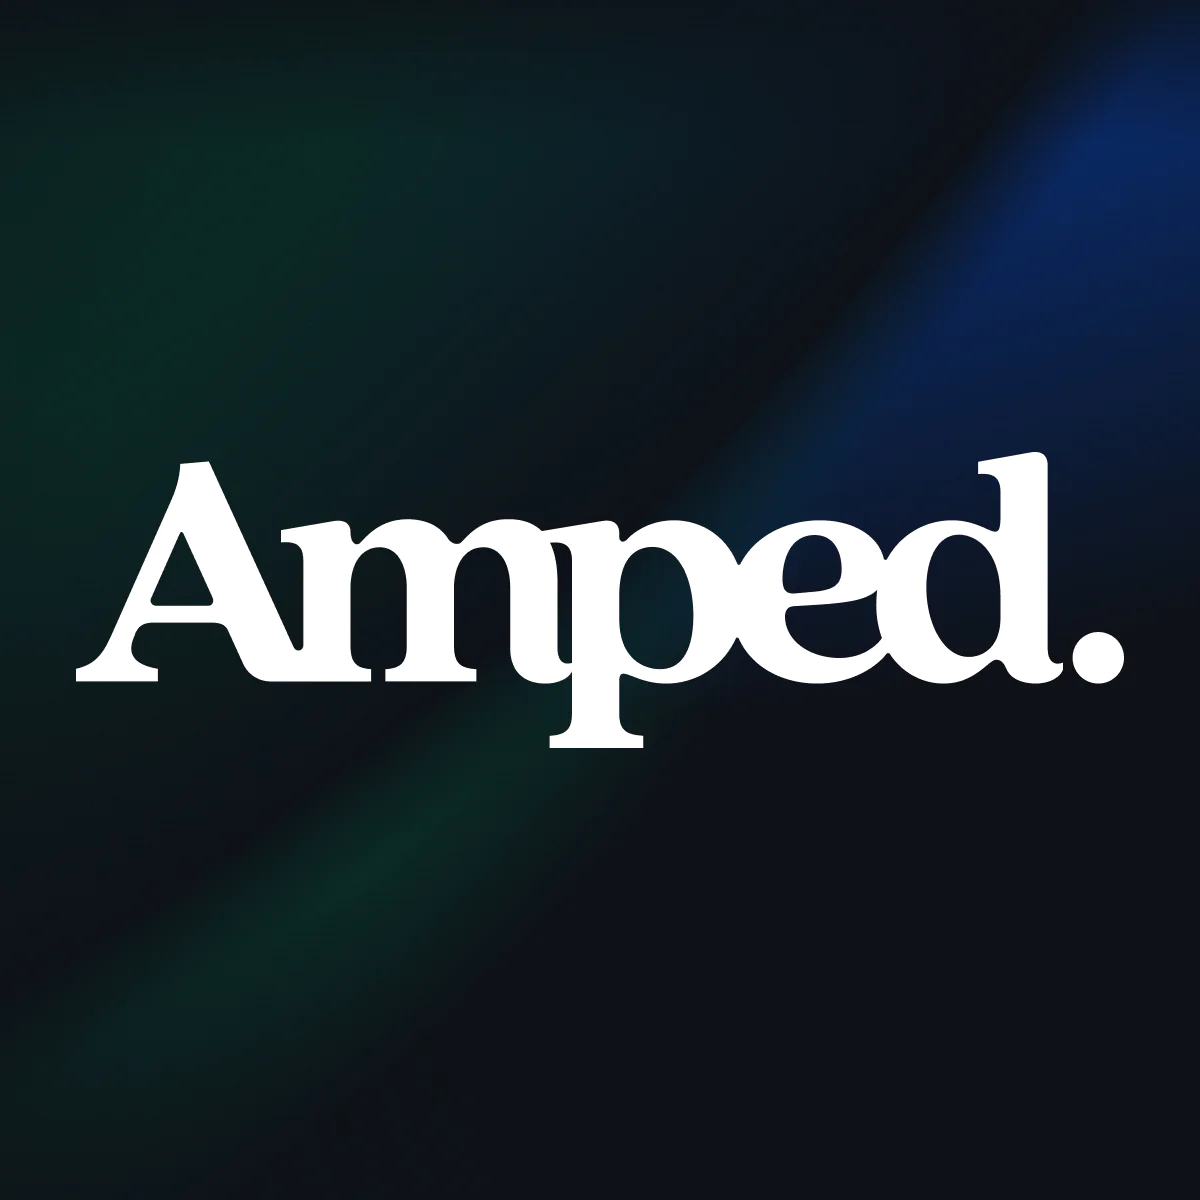 Amped: Email & SMS Popups